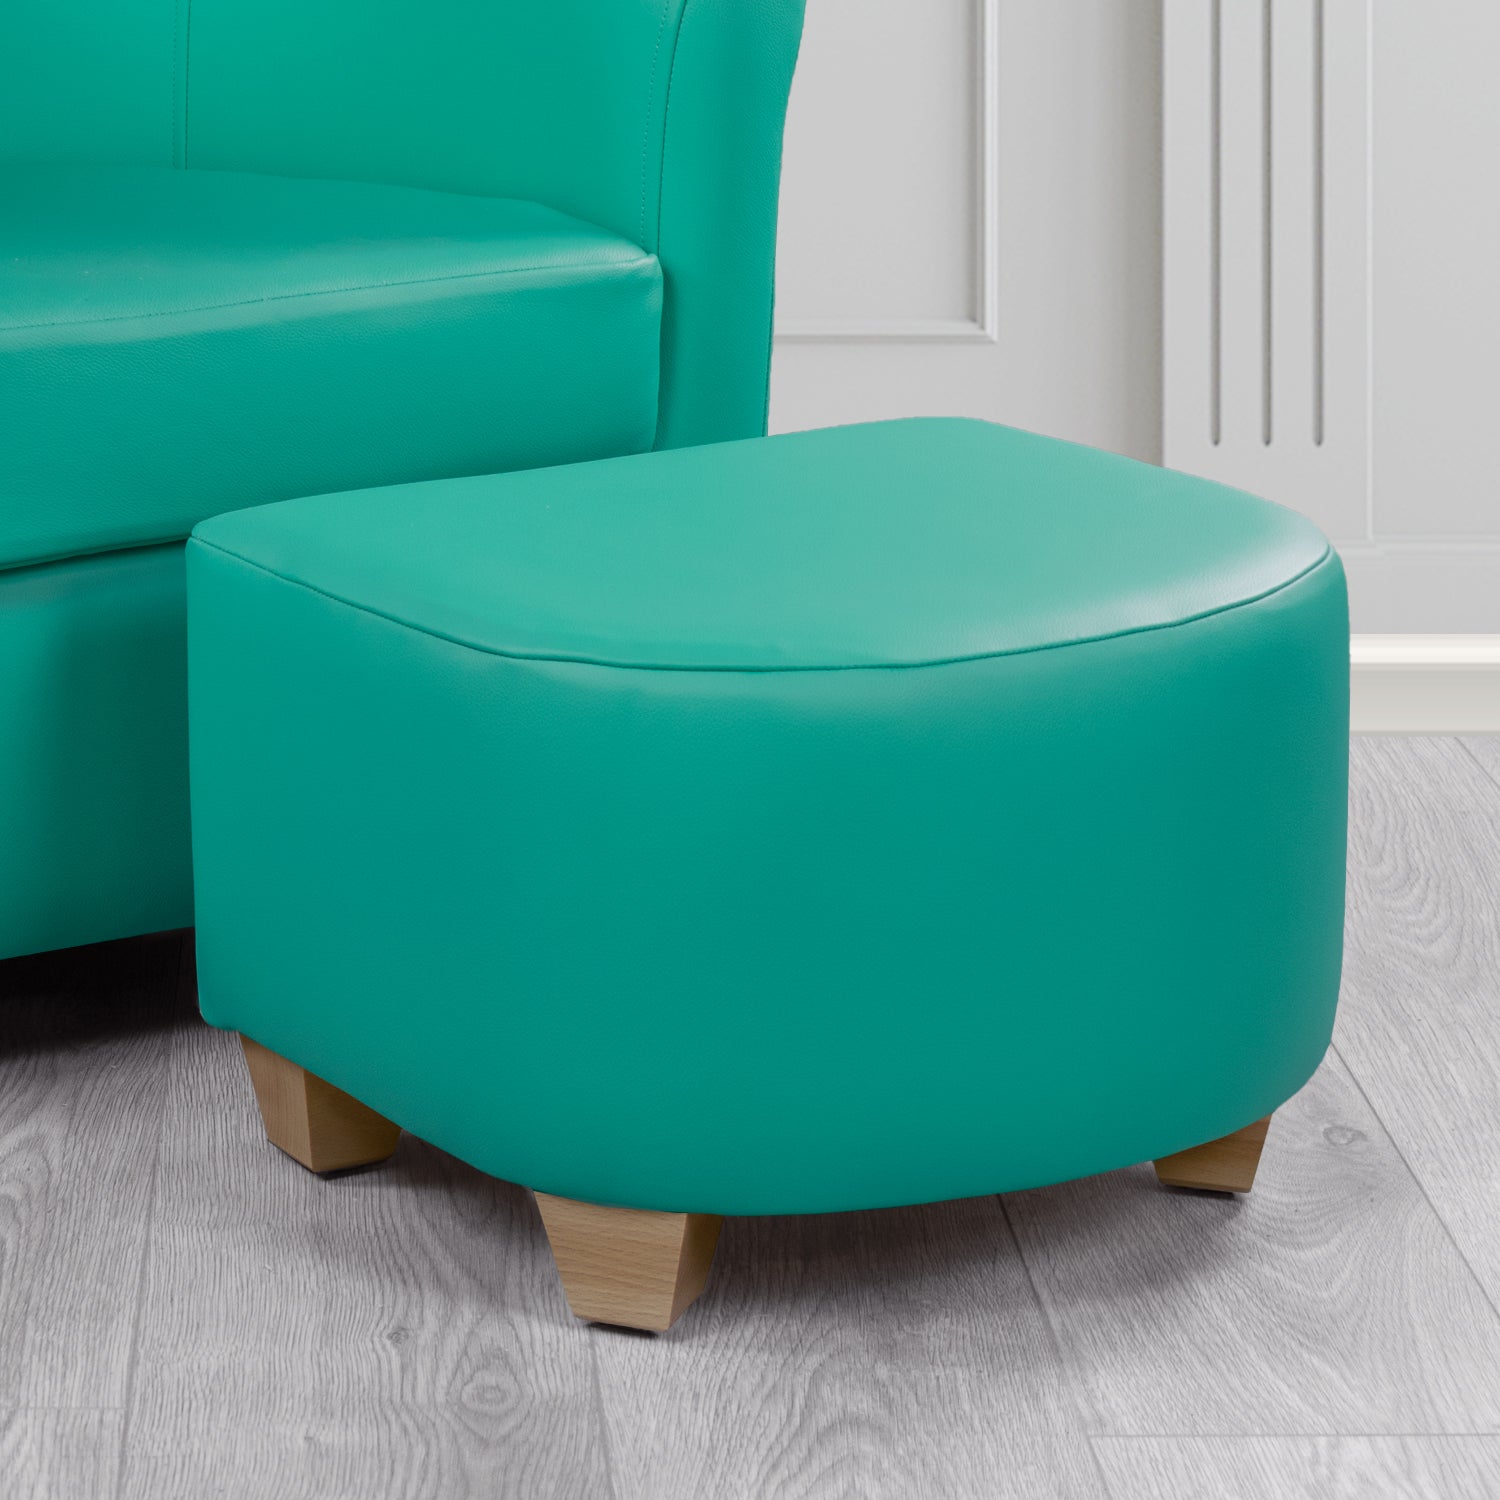 Cannes Shelly Dark Teal Crib 5 Genuine Leather Footstool (4631563010090)